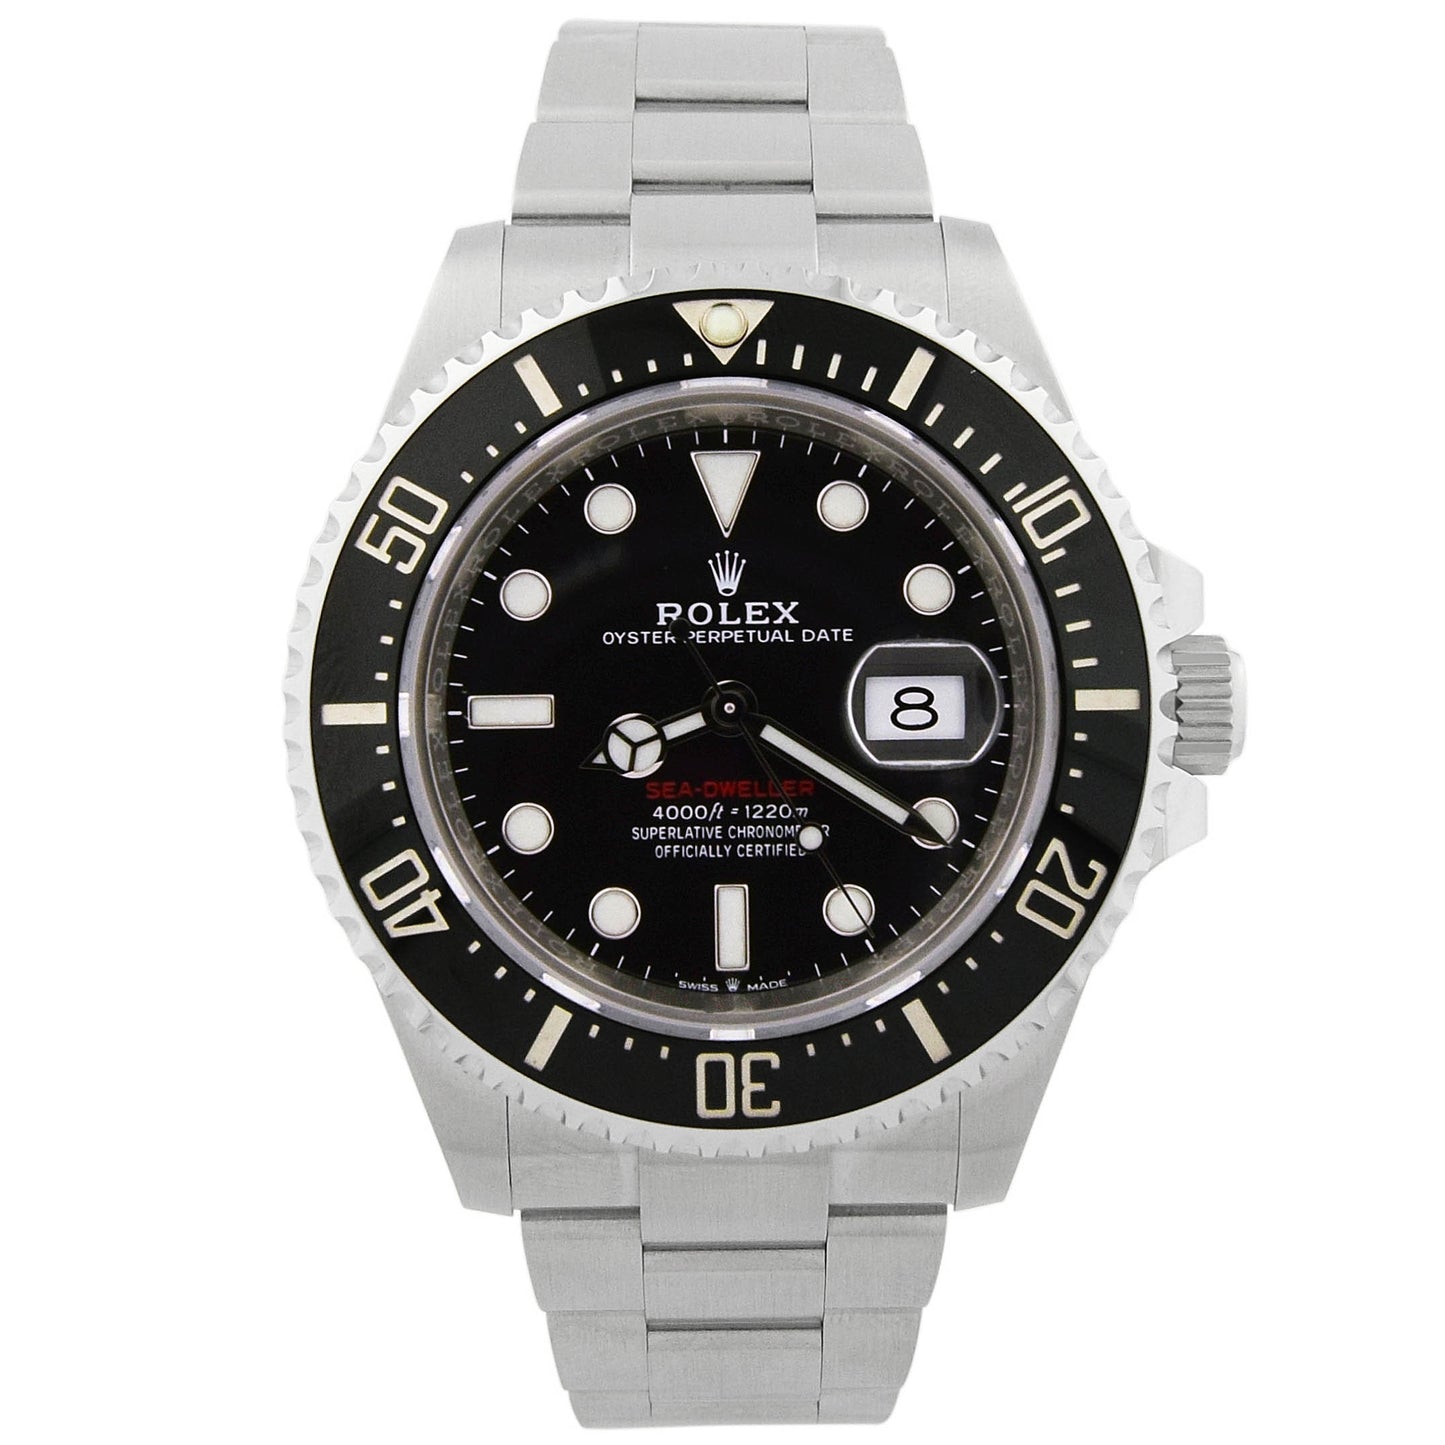 Rolex Sea-Dweller 43mm Stainless Steel Black Dot Dial Watch Reference #: 126600